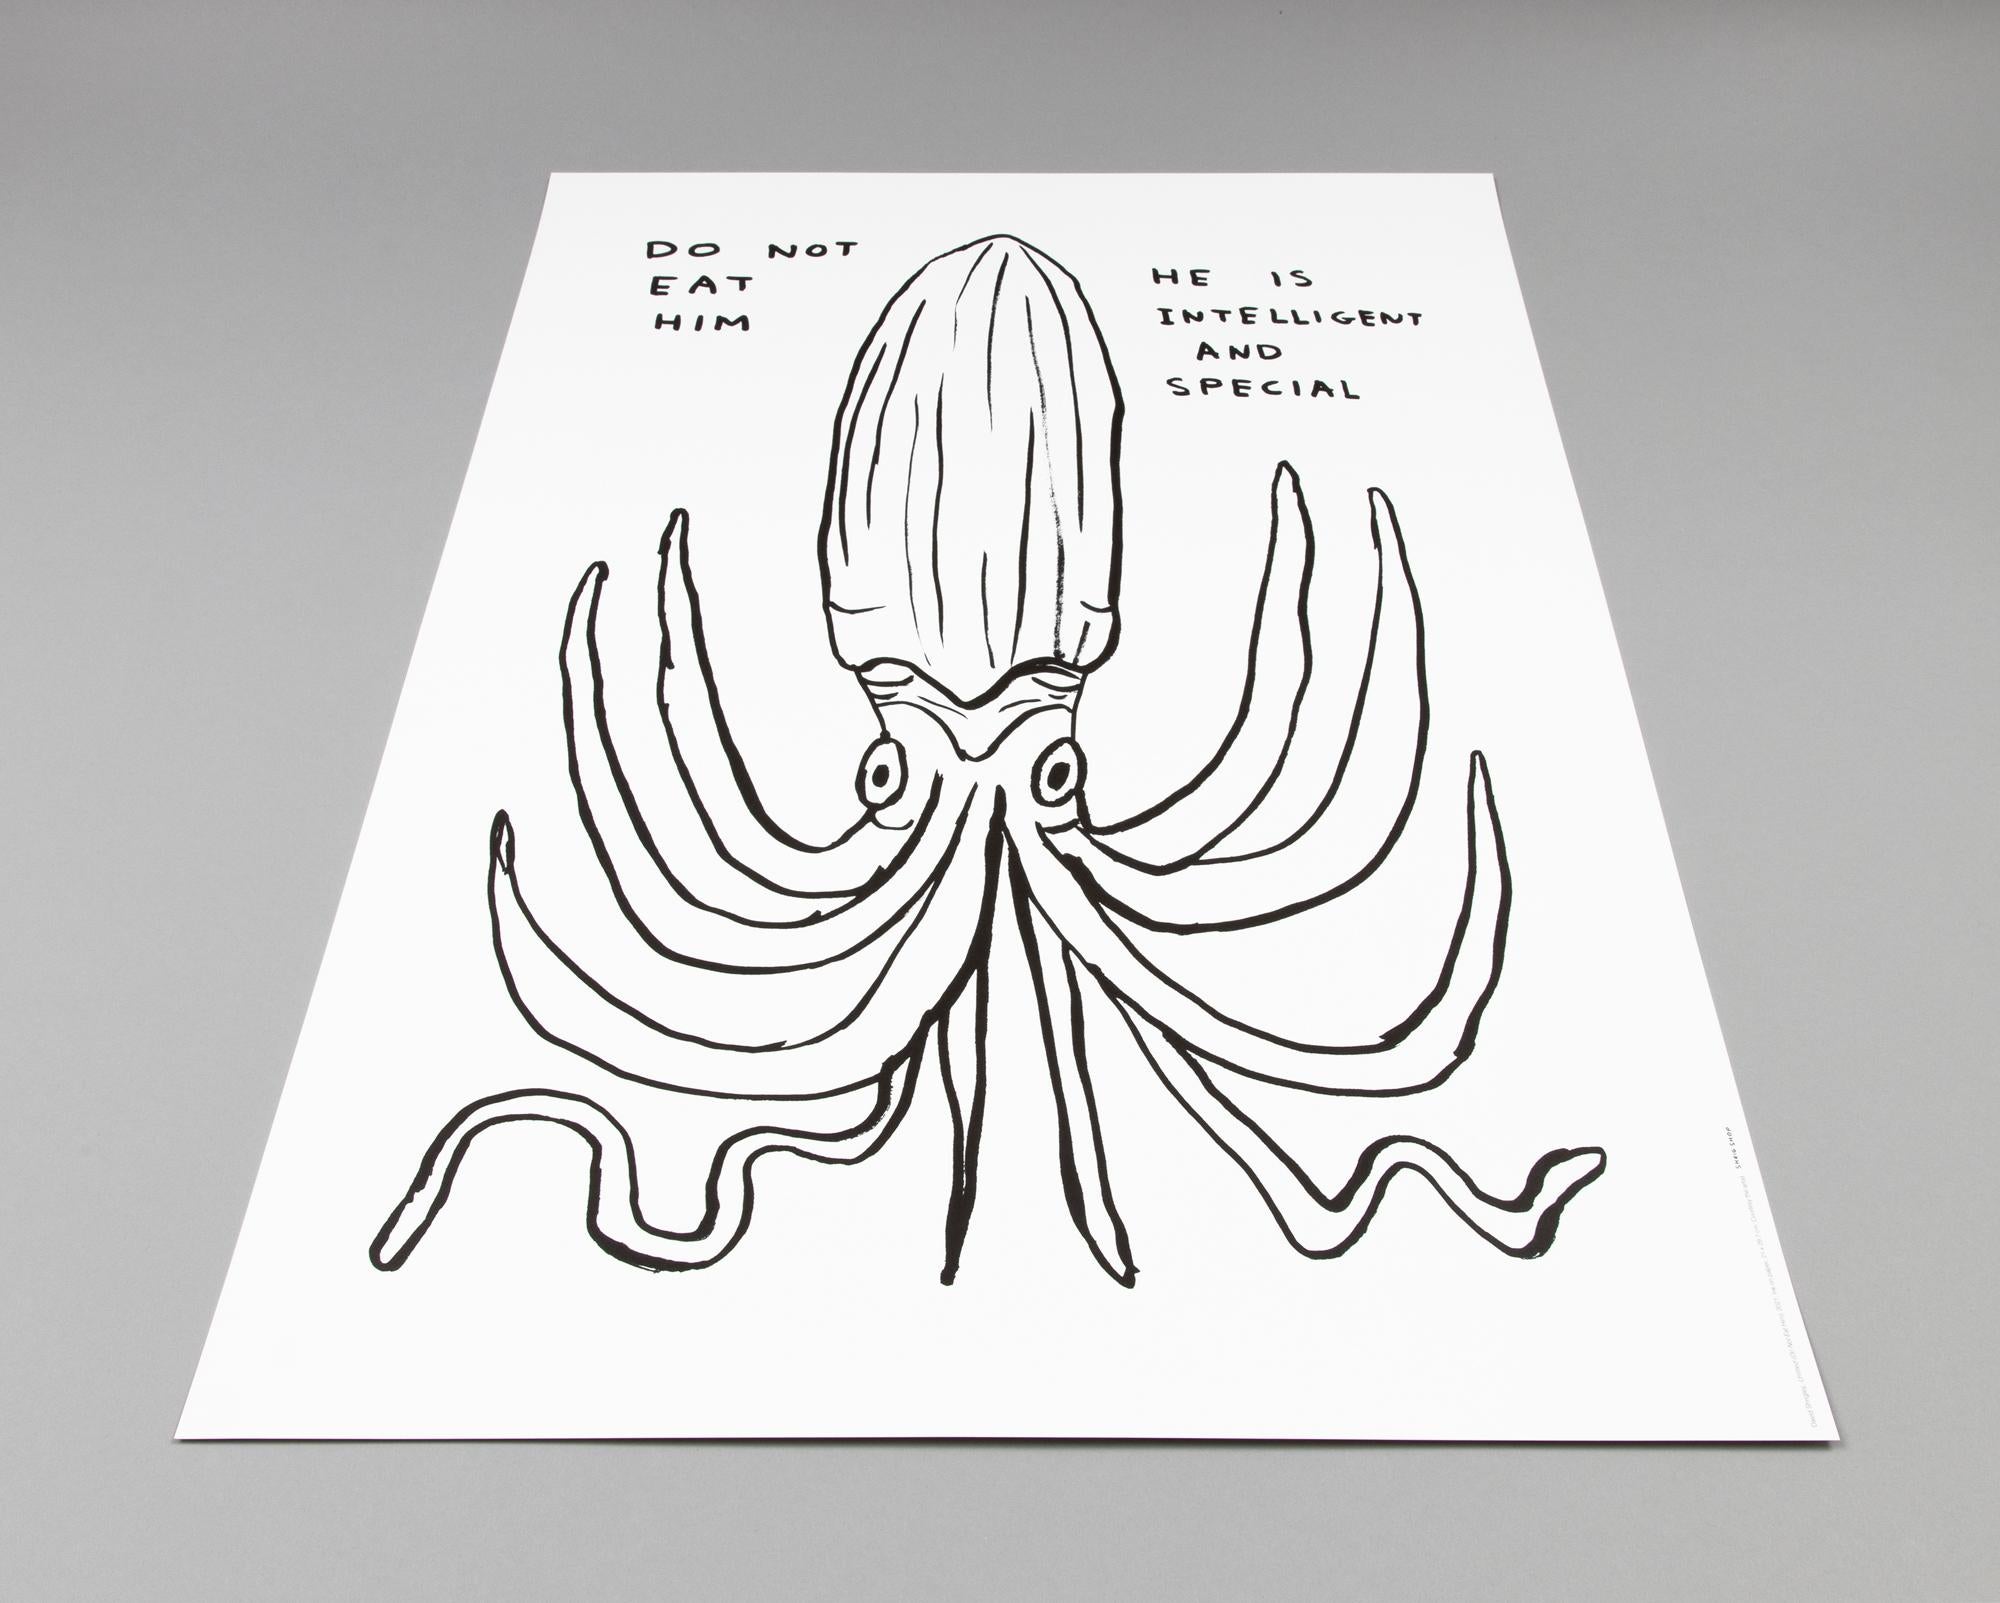 David Shrigley, I’ve Heard About Freedom + Do Not Eat Him - Set of 2 Prints For Sale 2